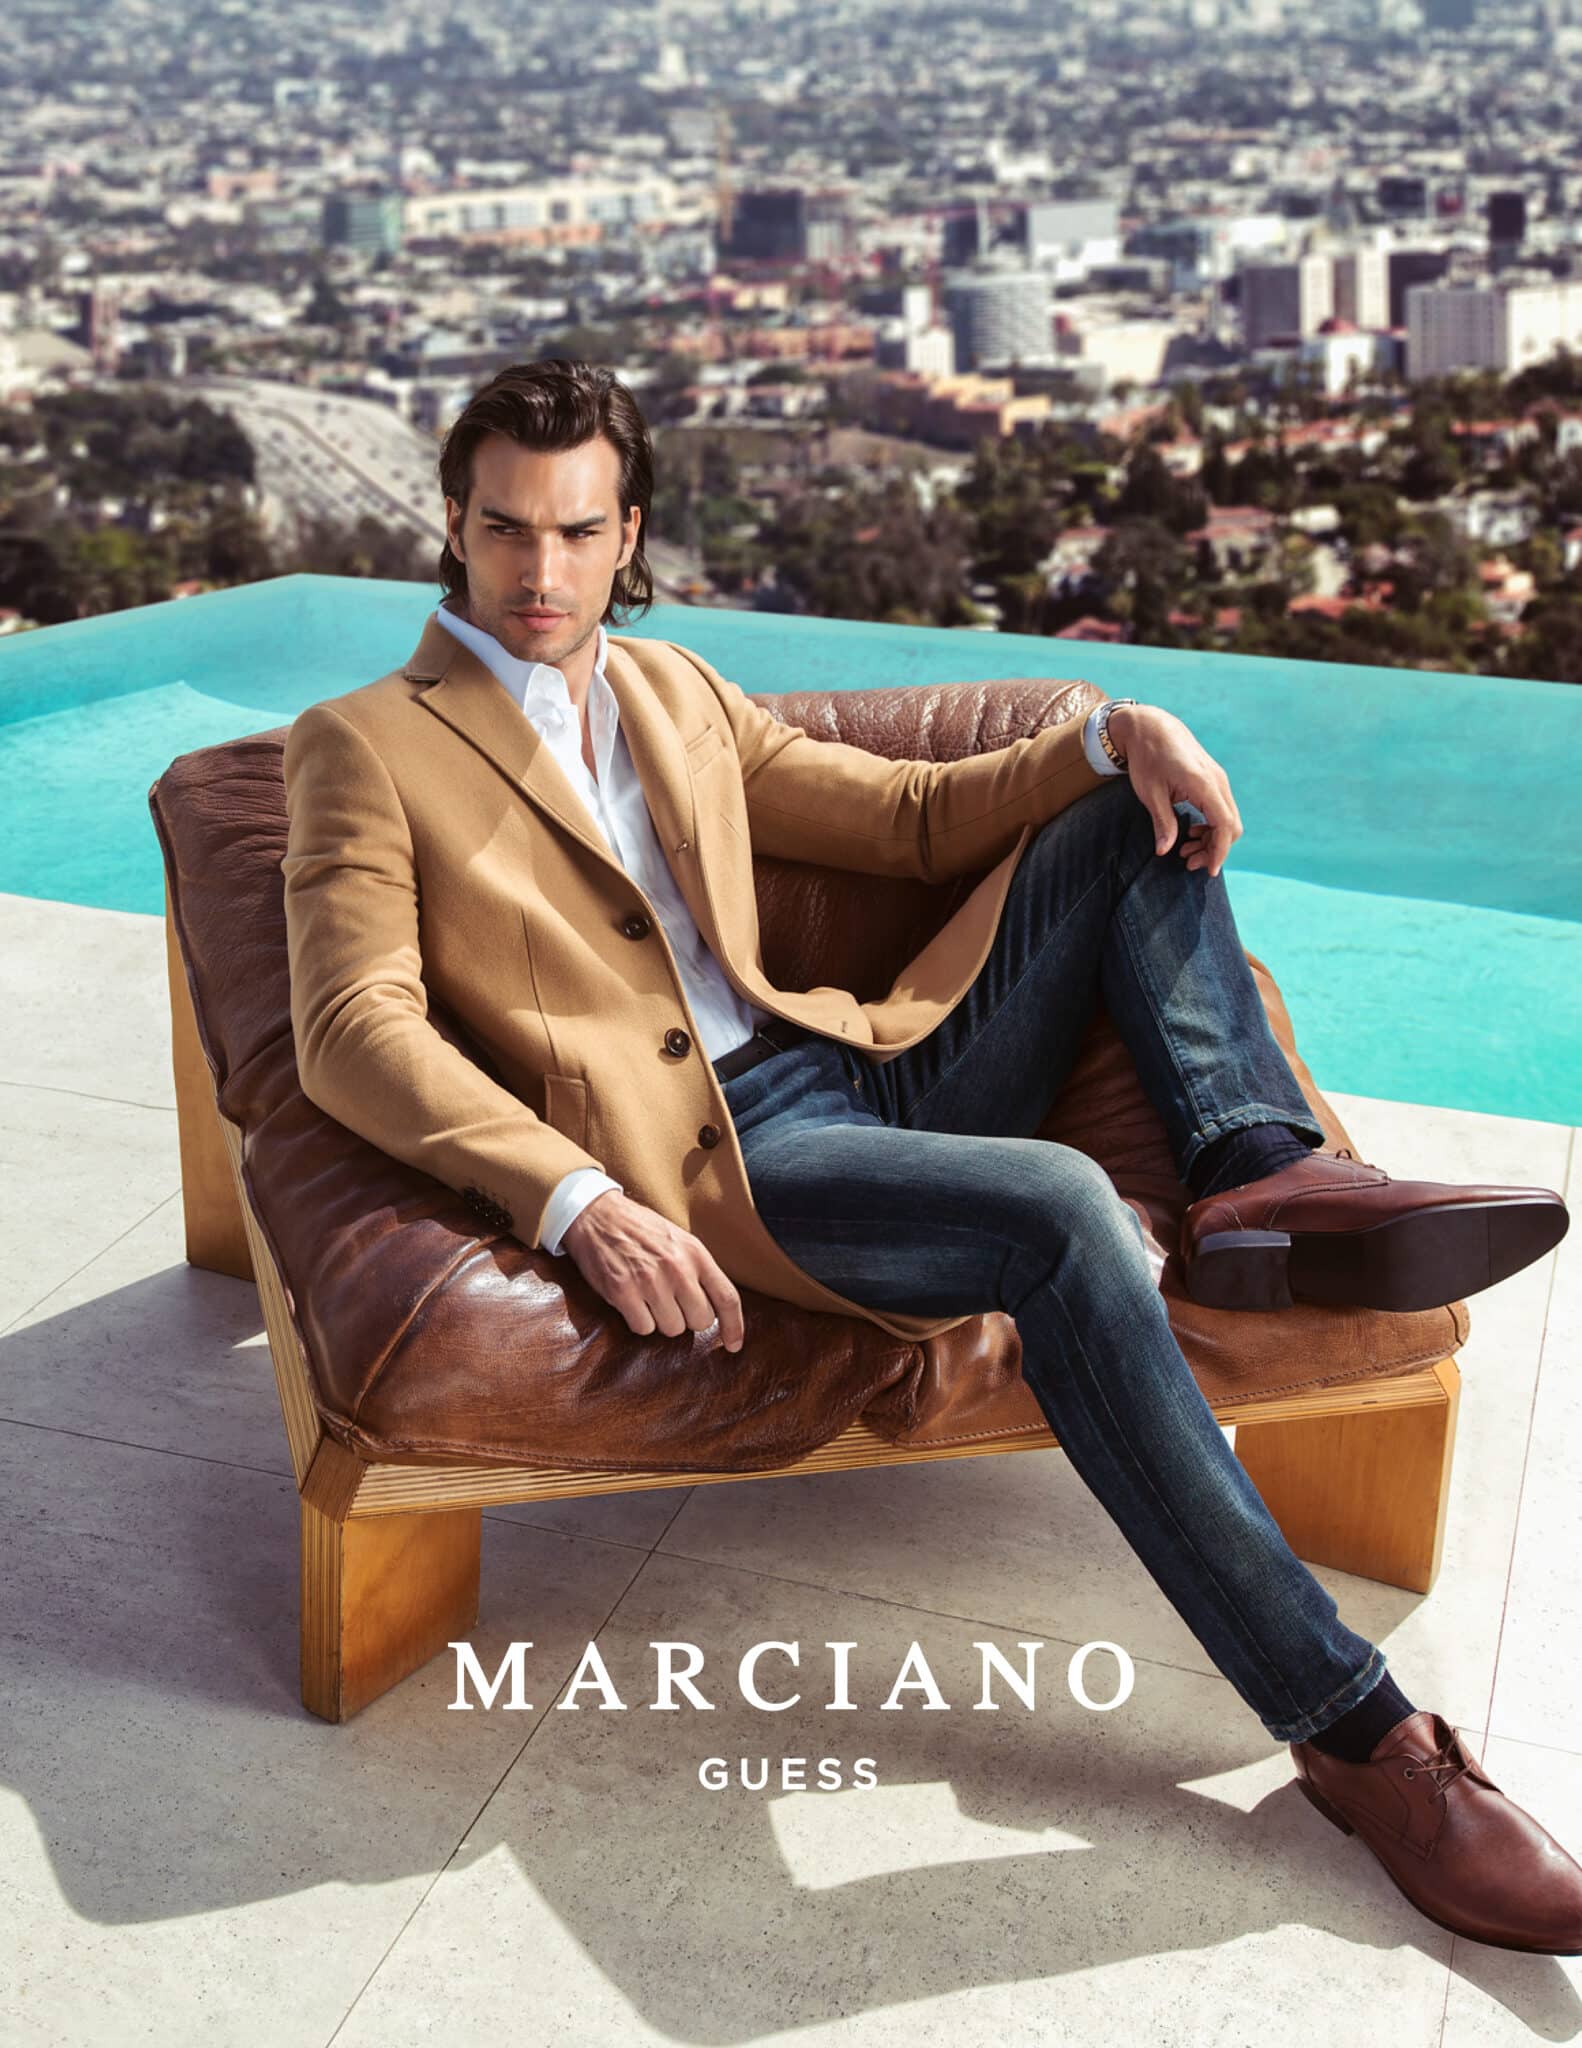 28 - Guess - Marciano (2017) 2